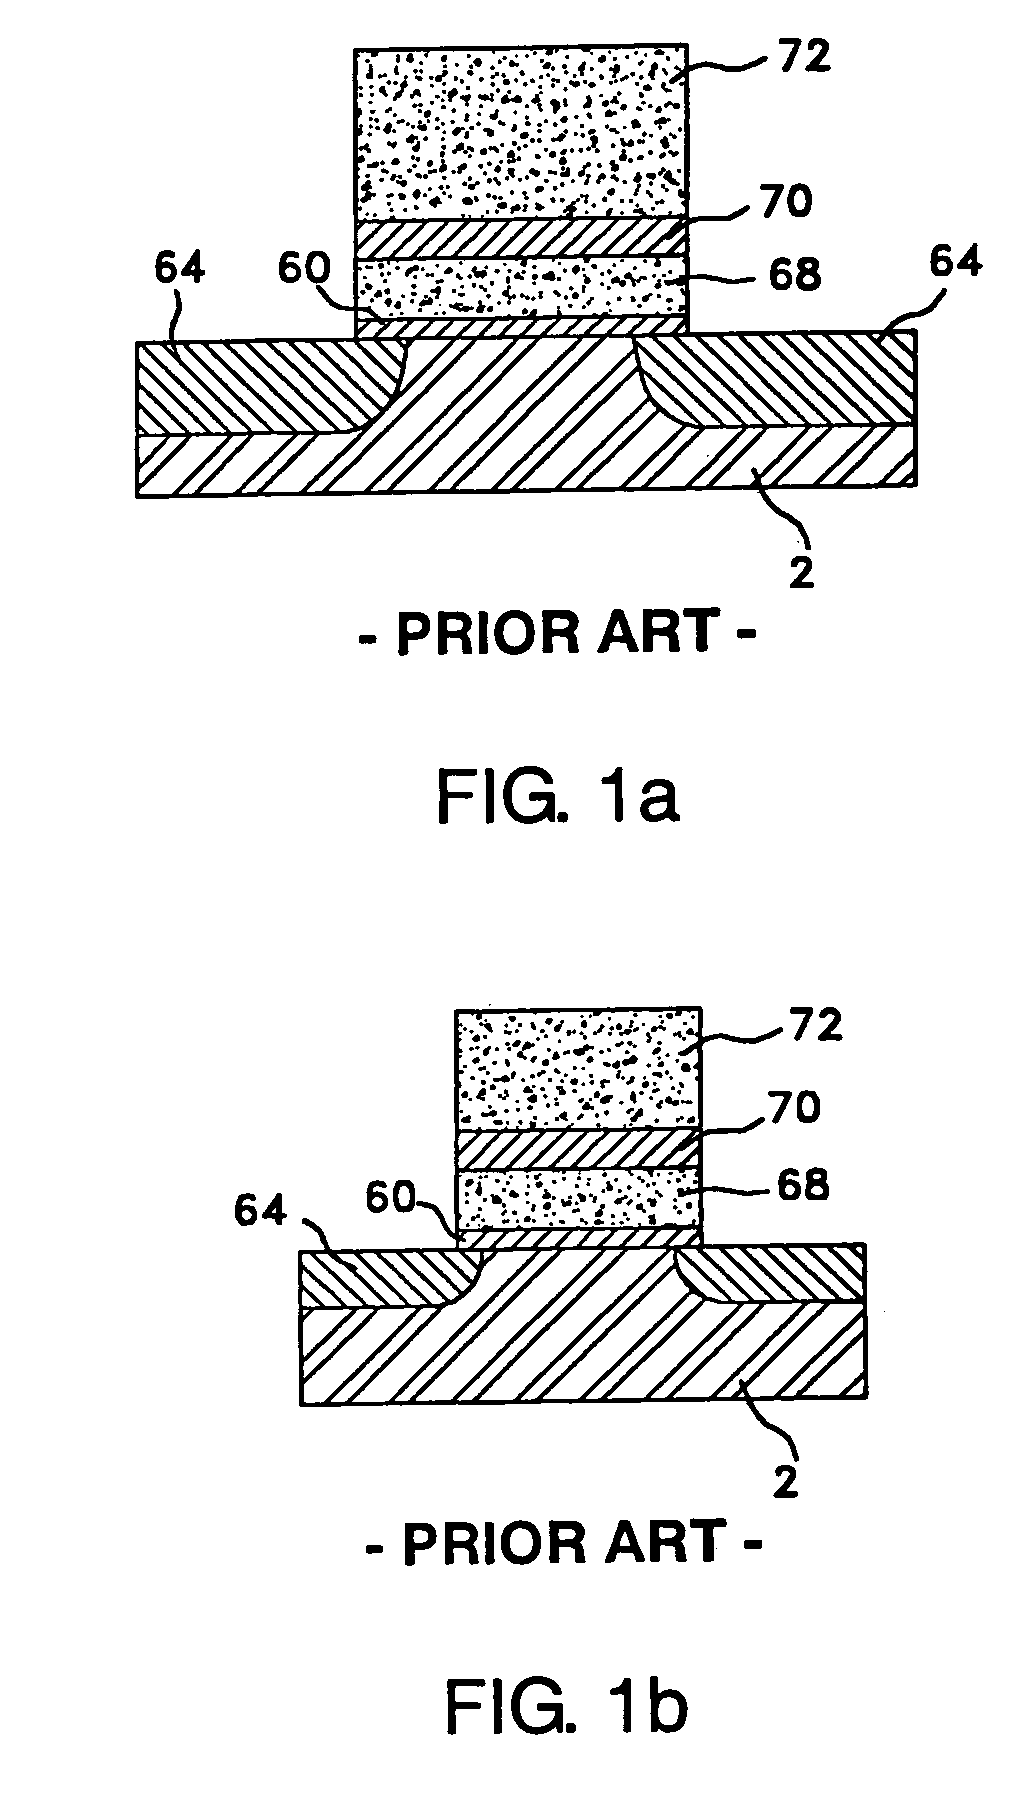 Double-gate flash memory device